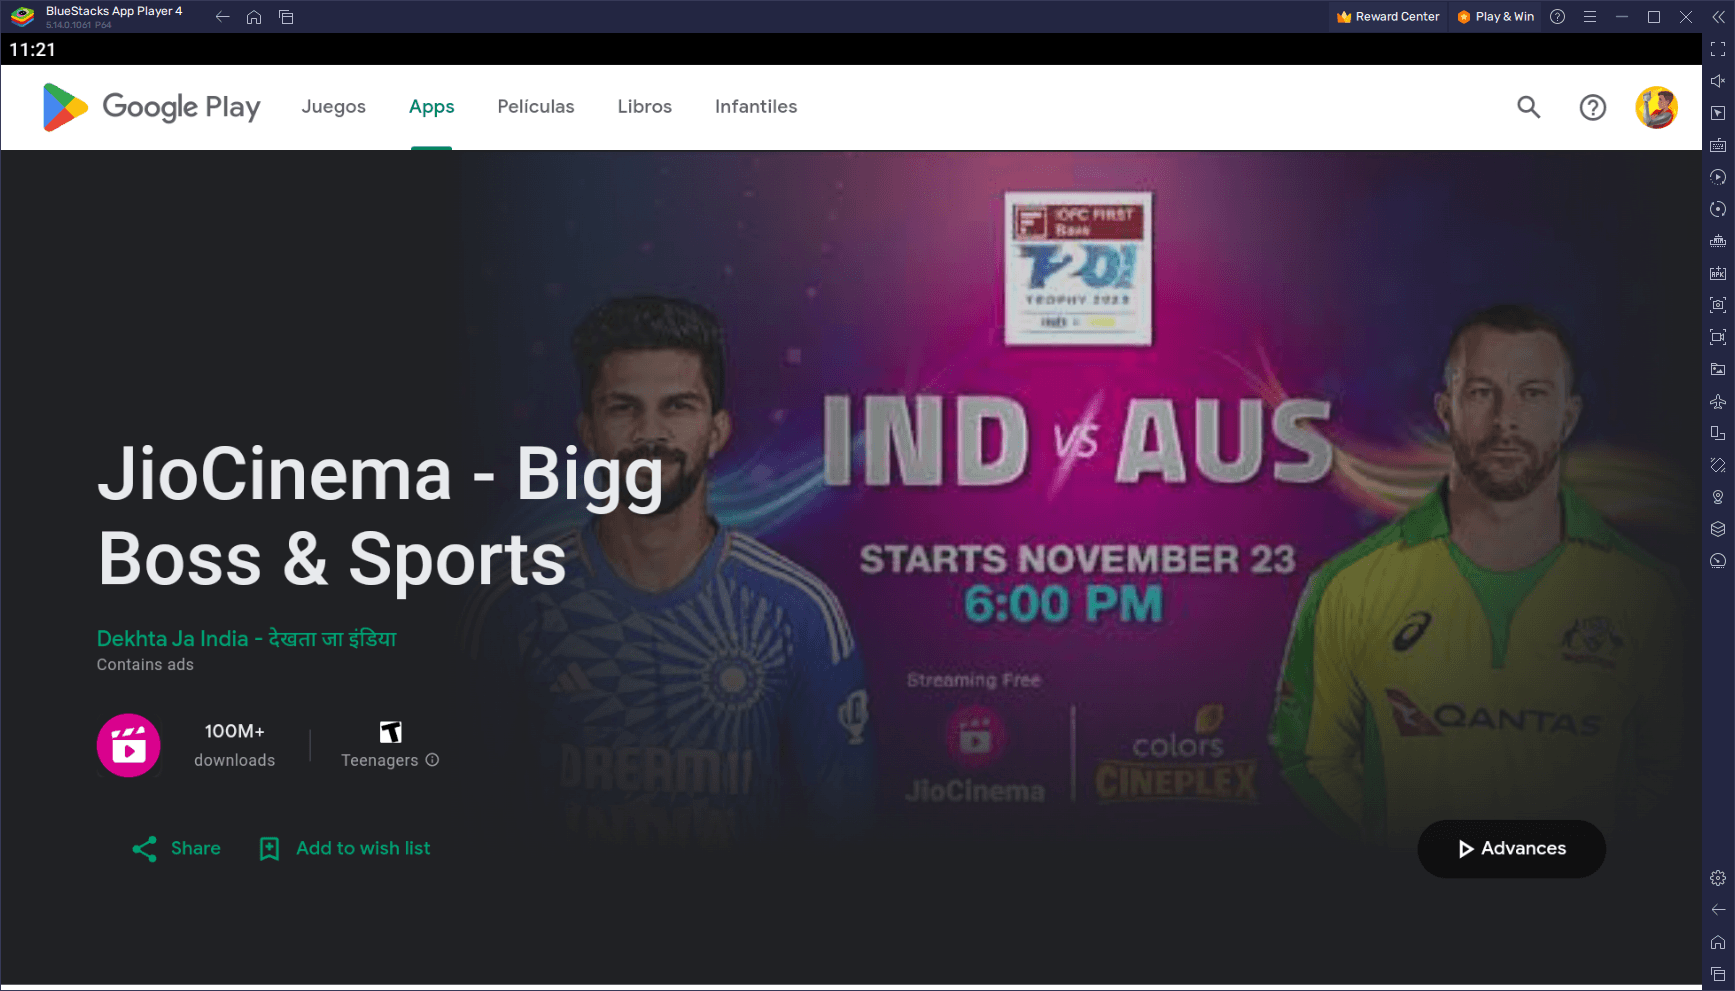 How to watch IPL auction live free on Mobile?